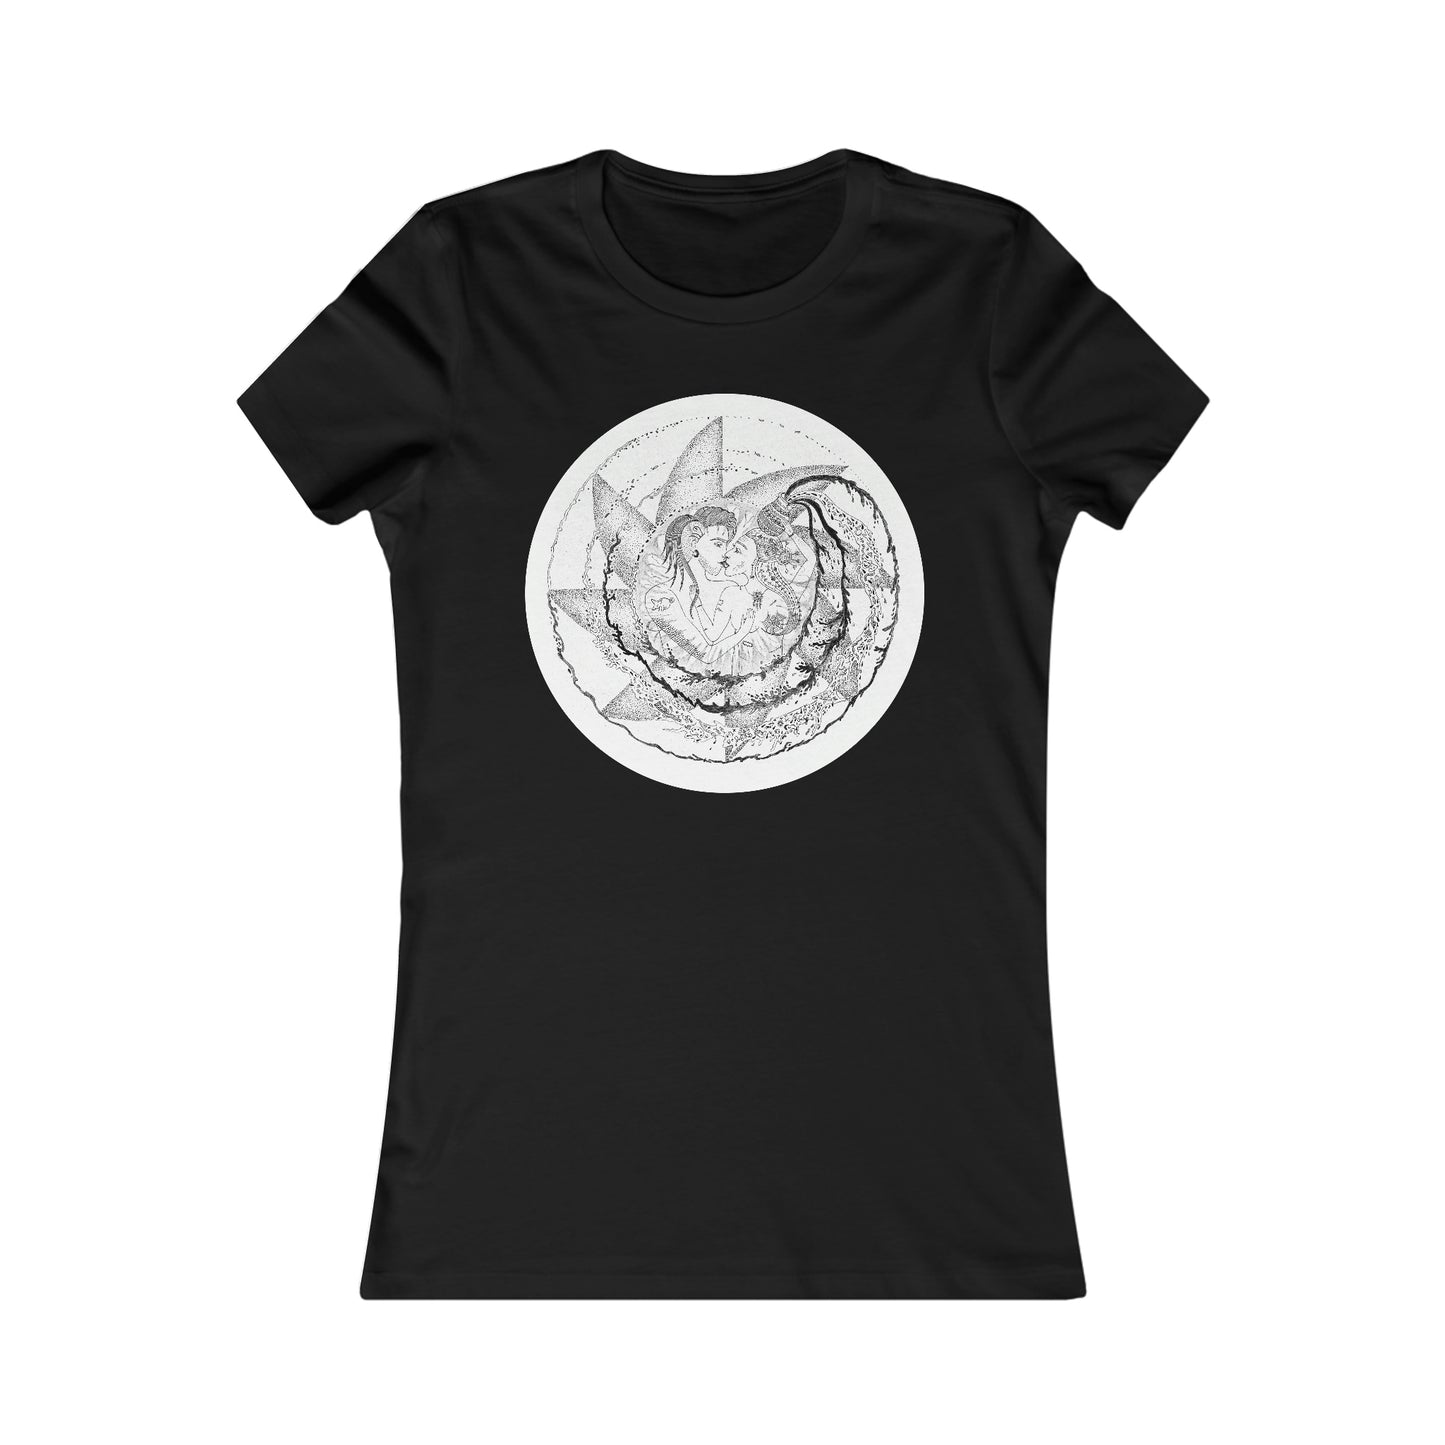 Chinese Zodiac Sign T Shirt (Pig) Limited Edition